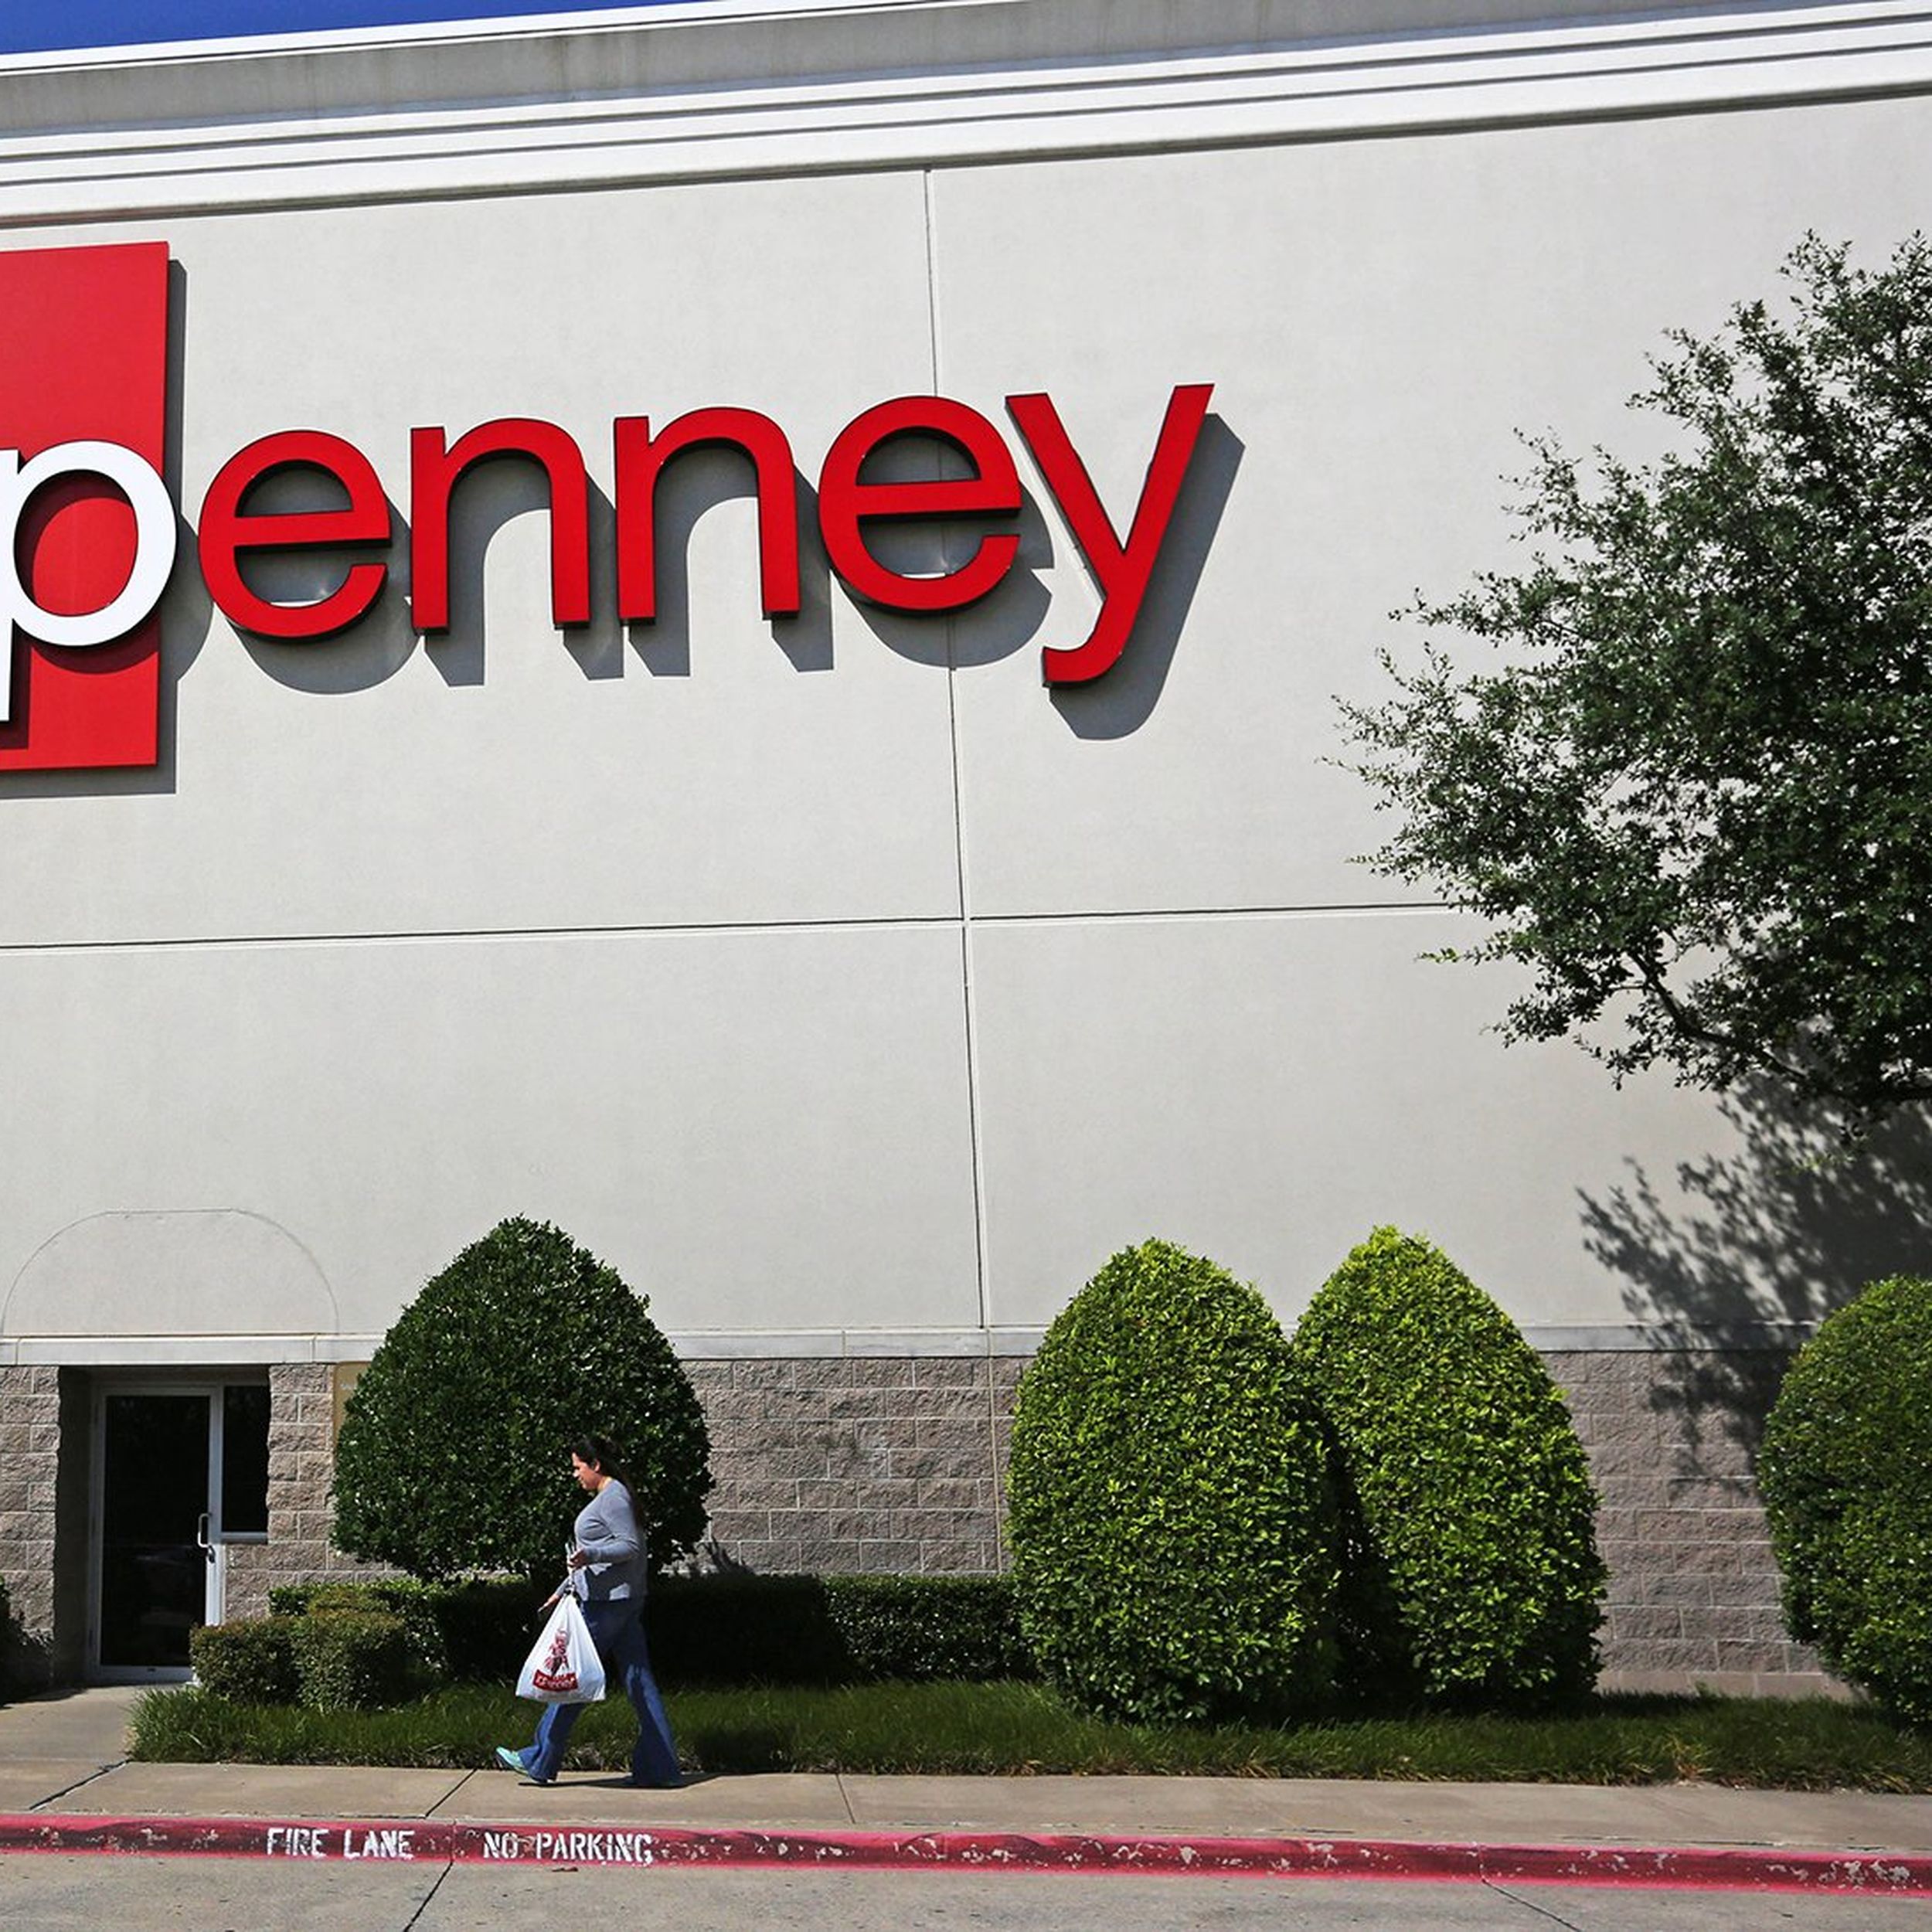 Sephora Opens Makeup Counter Inside JCPenney At Danbury Mall